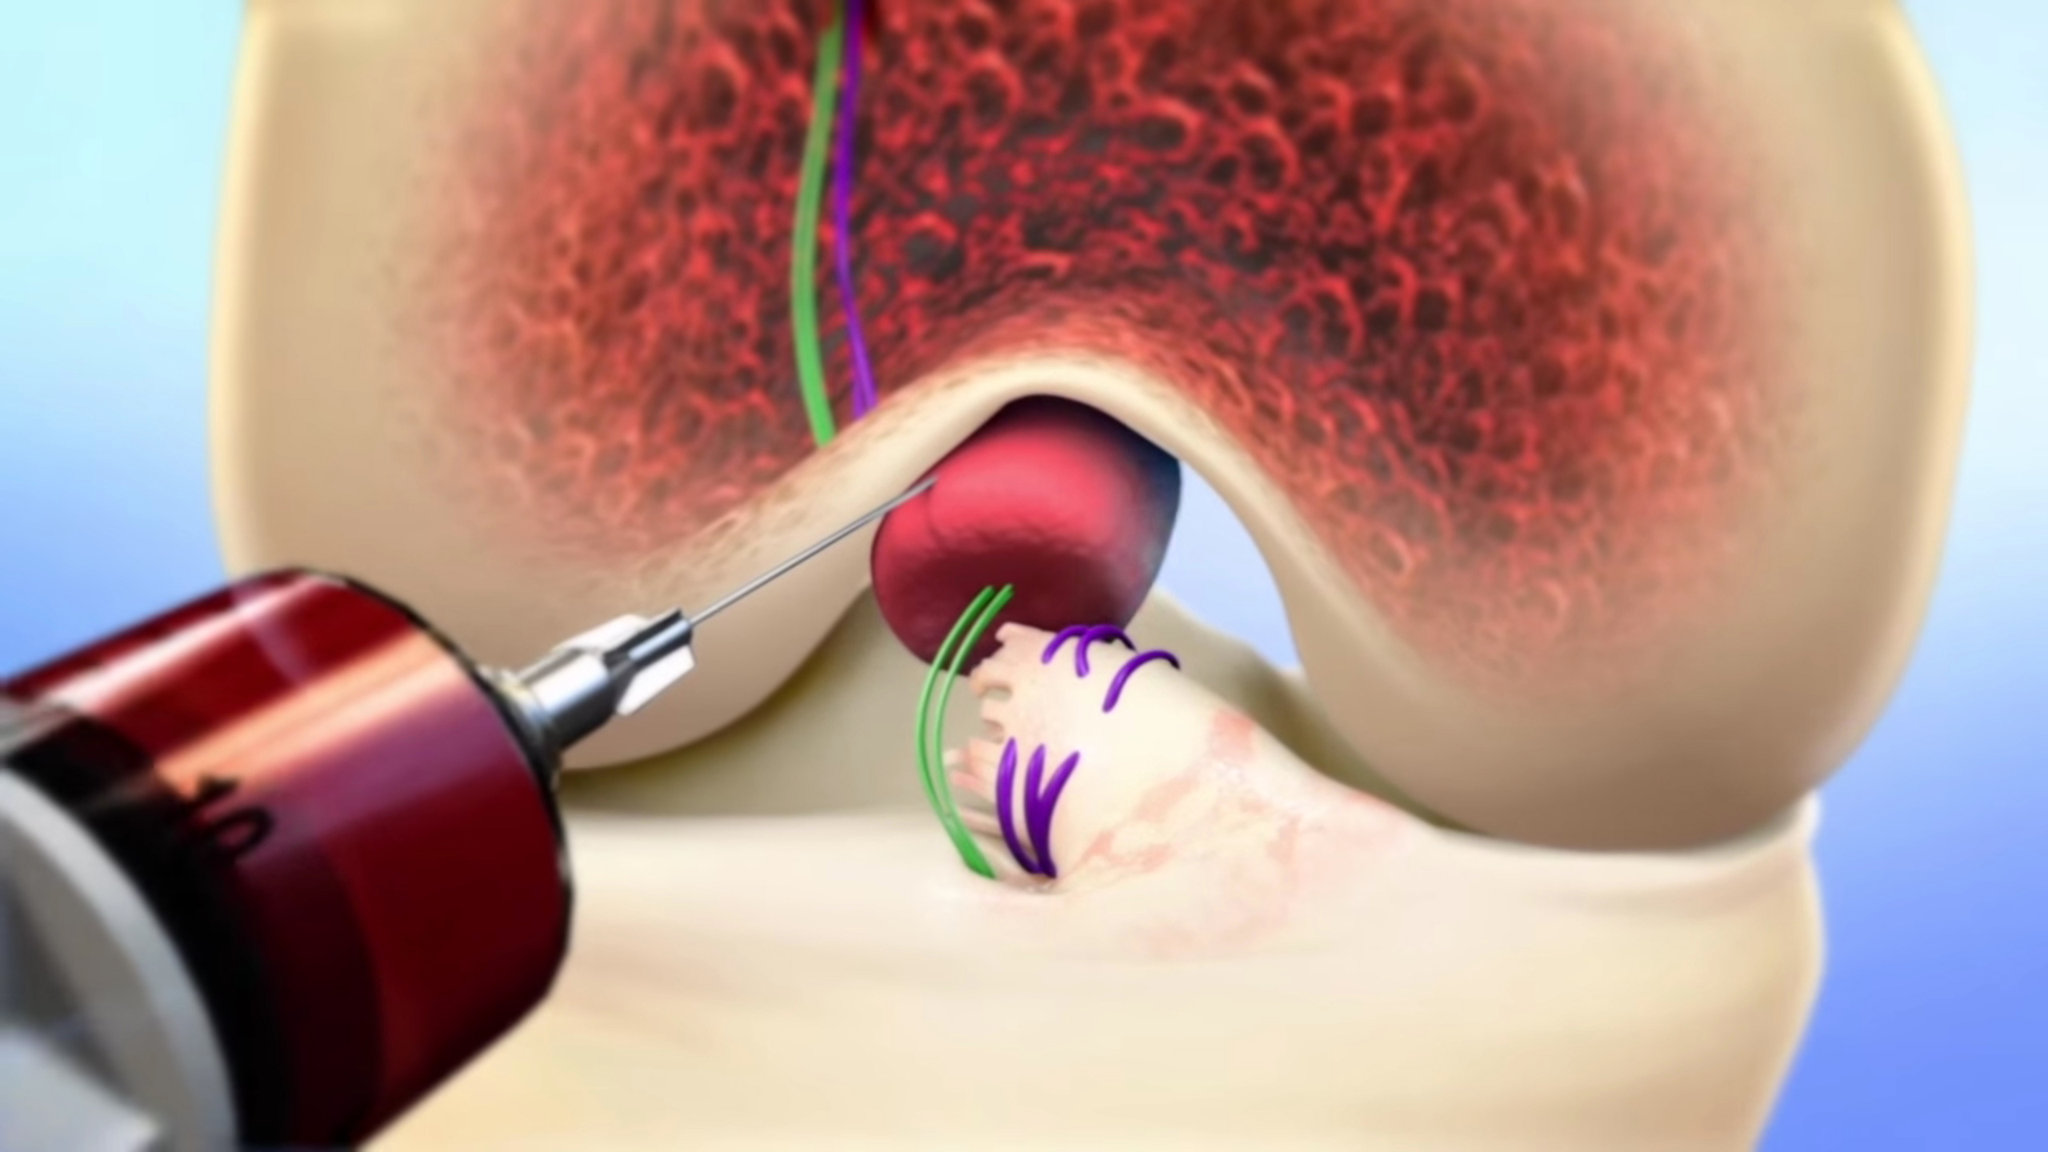 A patient's blood is injected into a sponge-like bridge that will help both ends of the torn ACL reconnect and heal in a procedure surgeons recently completed